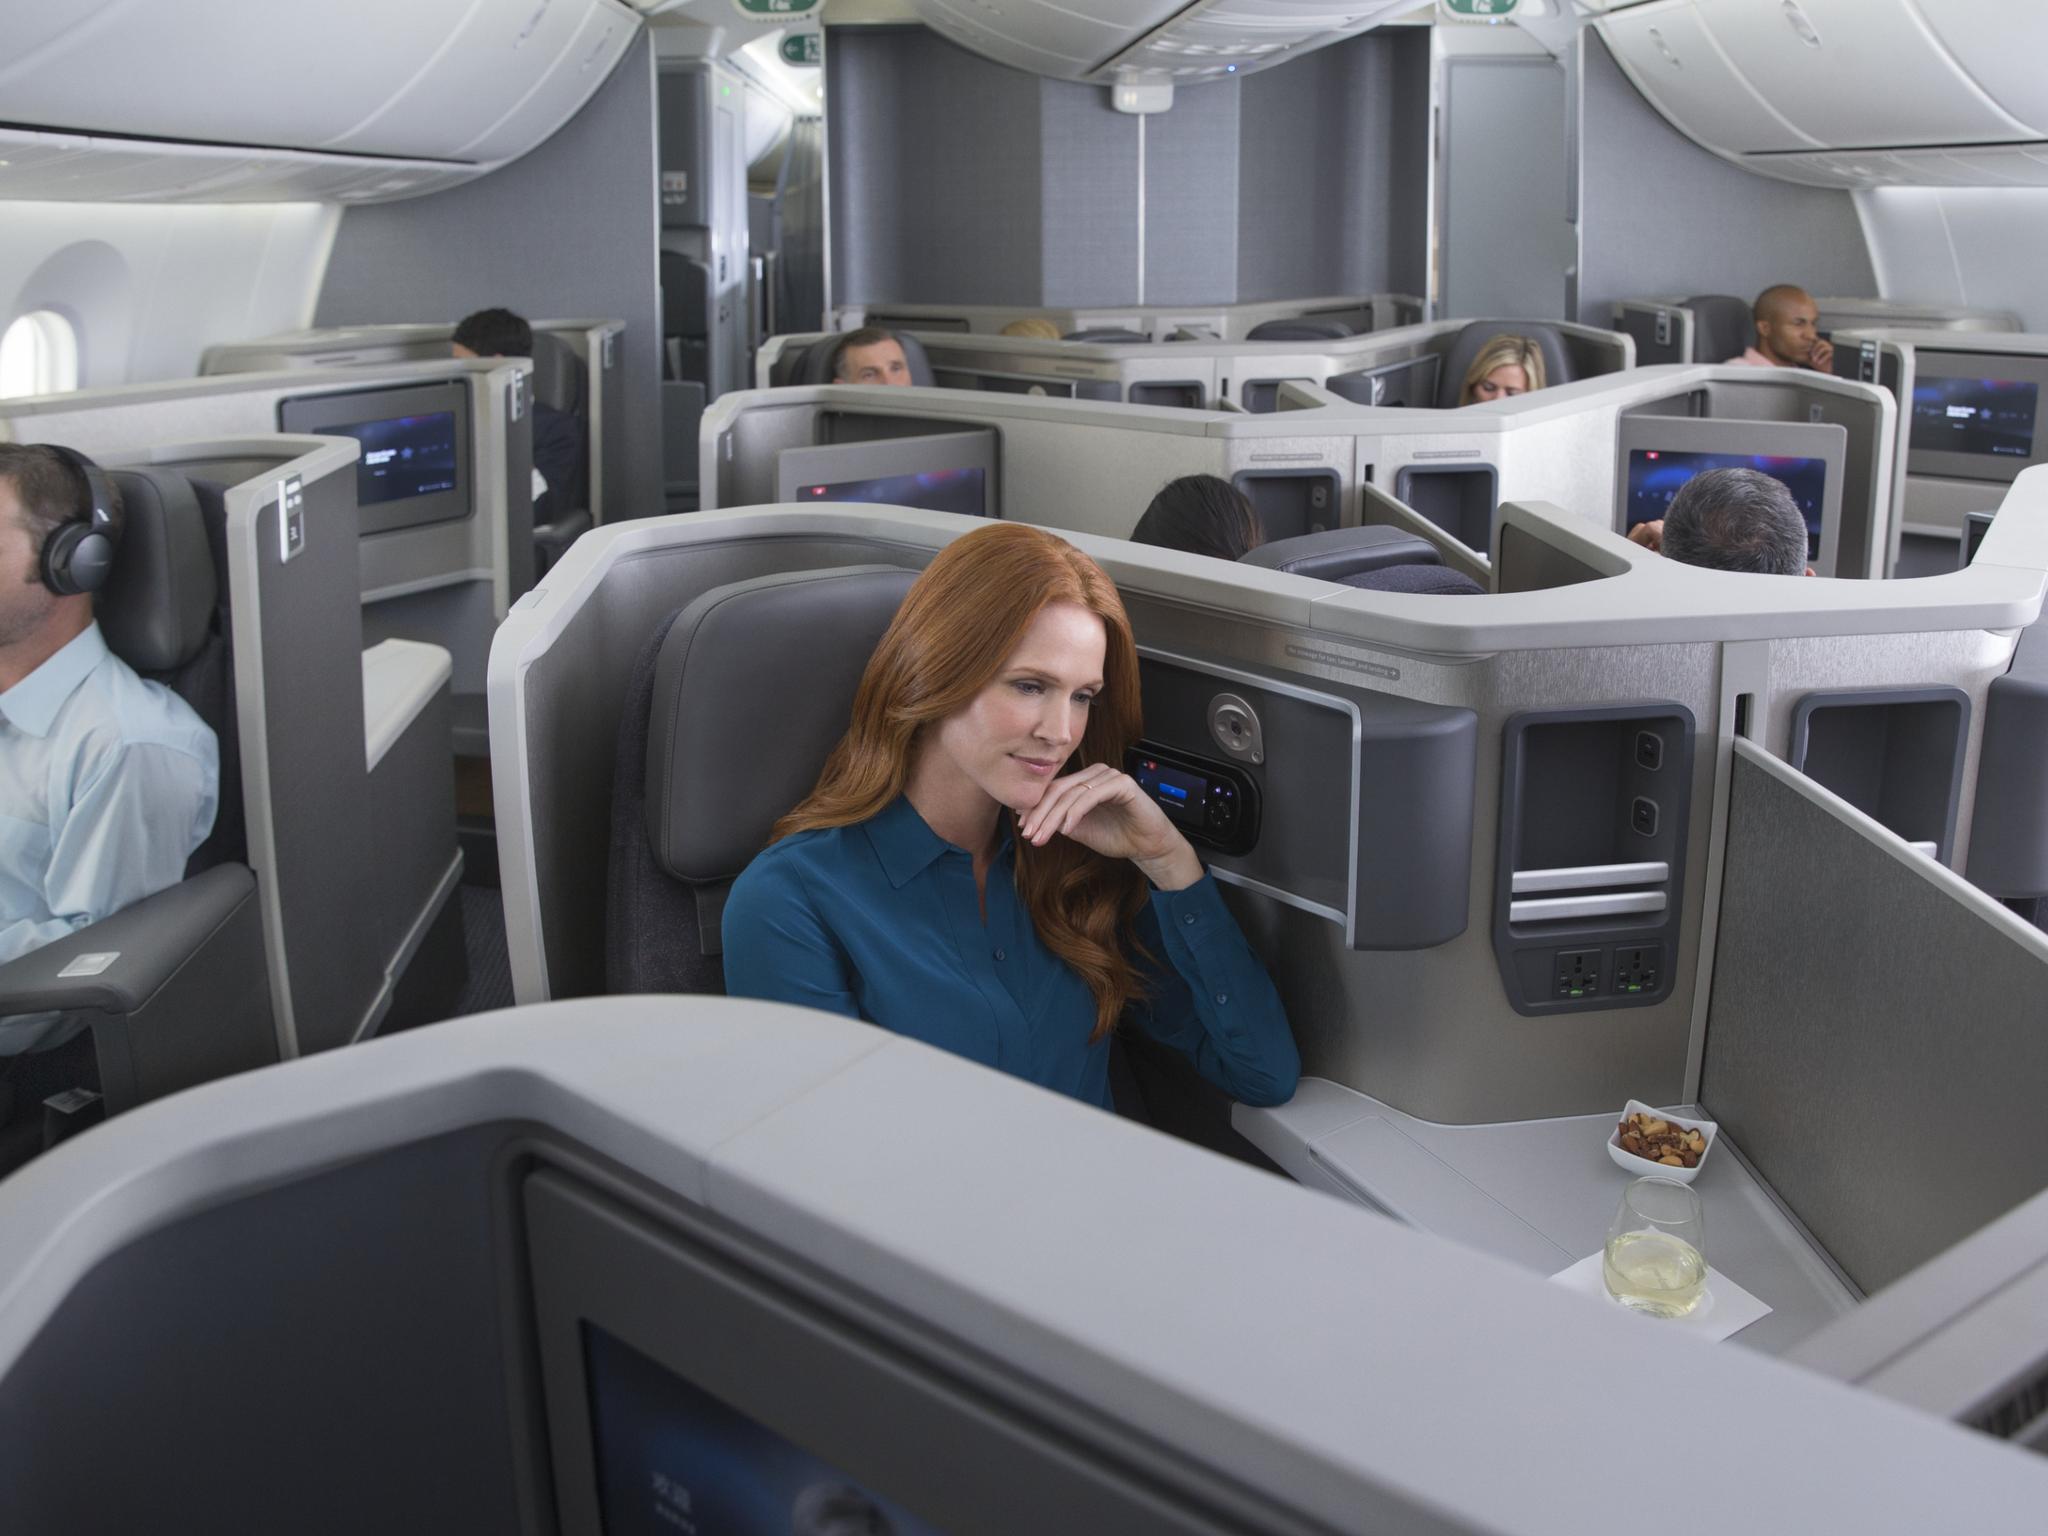 Flight review: American Airlines flagship business class | The Australian